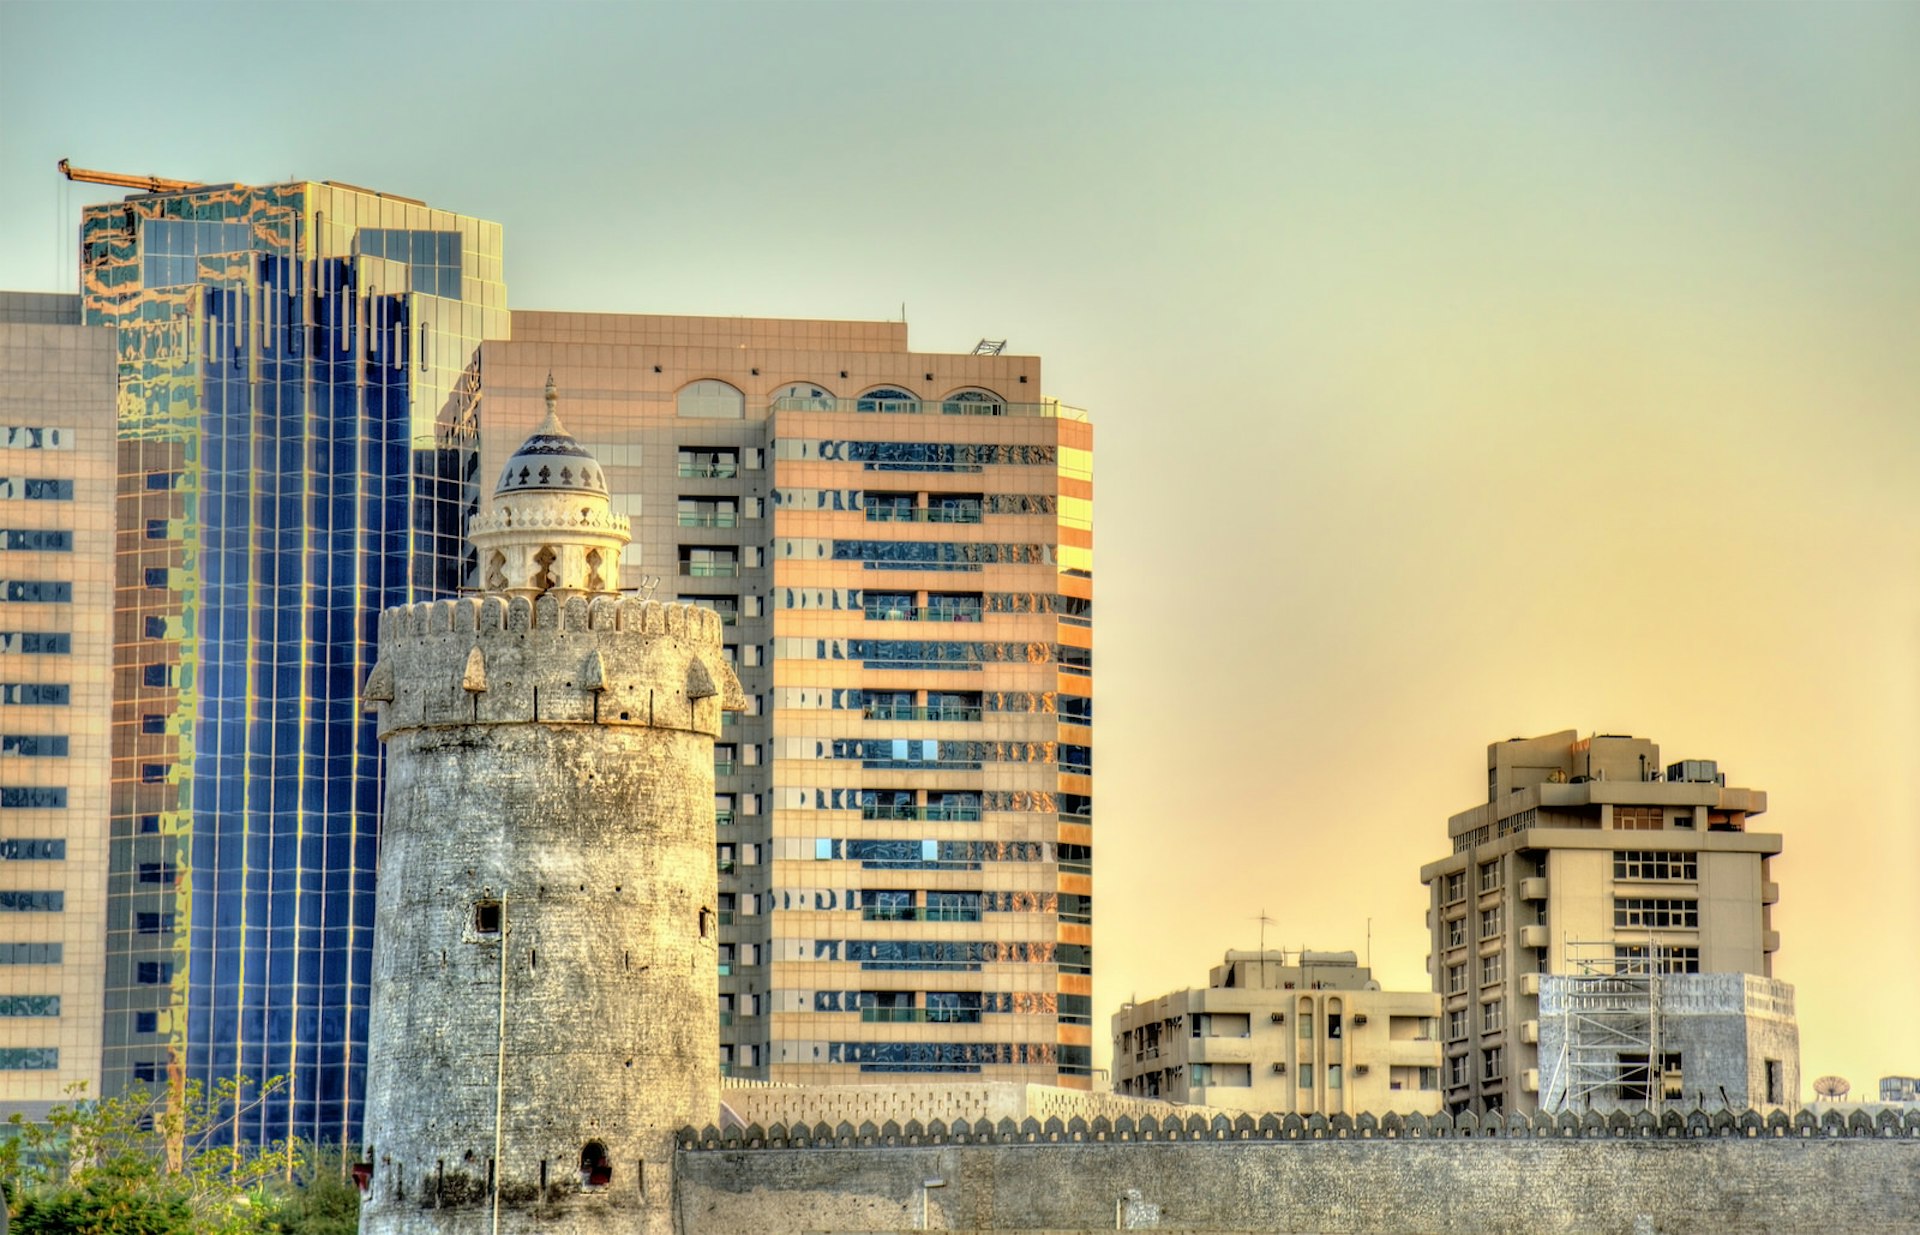 The fort of Qasr Al Hosn, the oldest building in Abu Dhabi, sits in front of modern skyscrapers